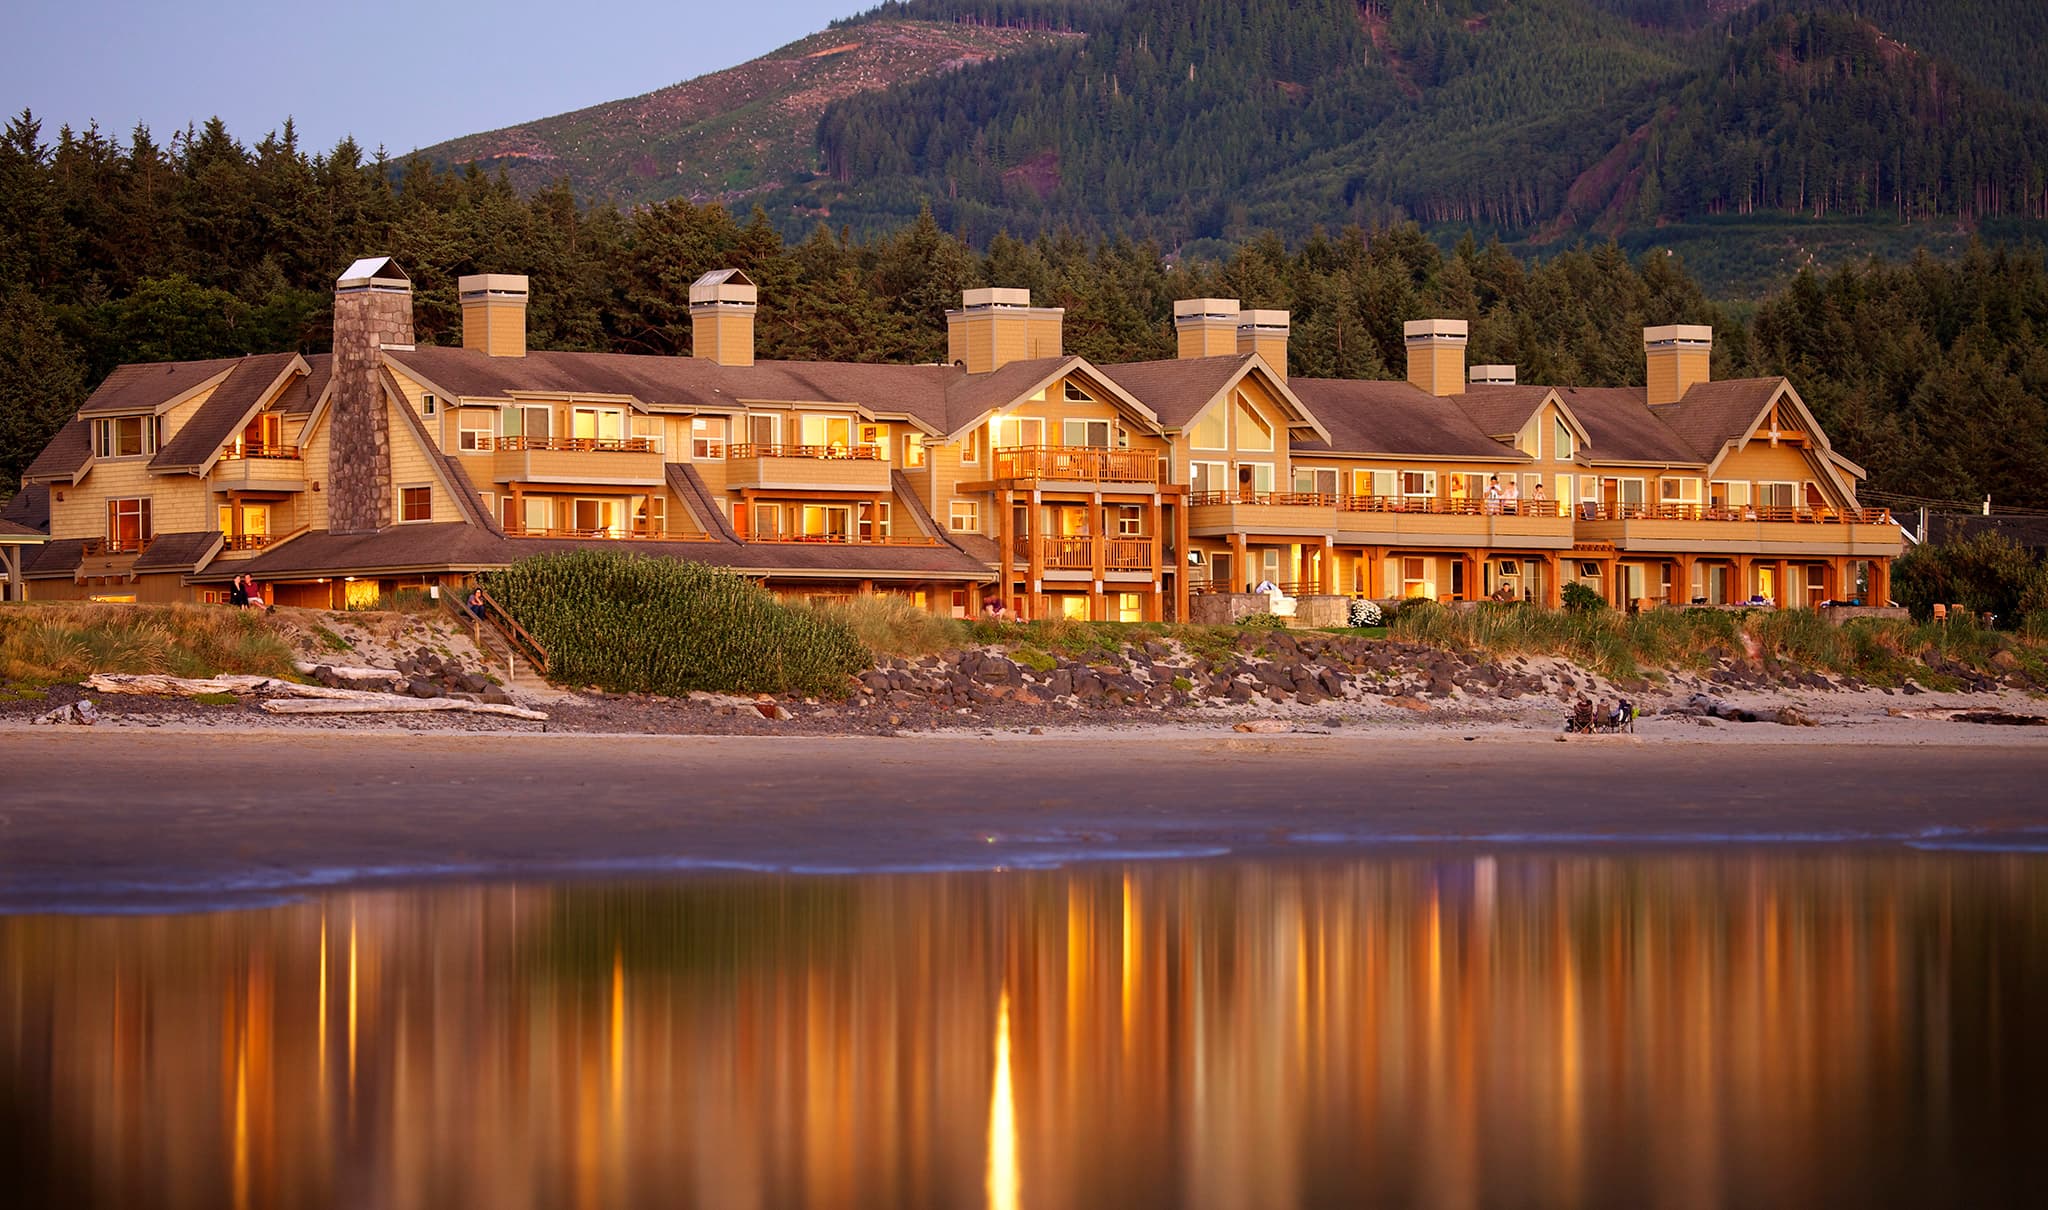 Oceanfront hotel in Cannon Beach, Oregon